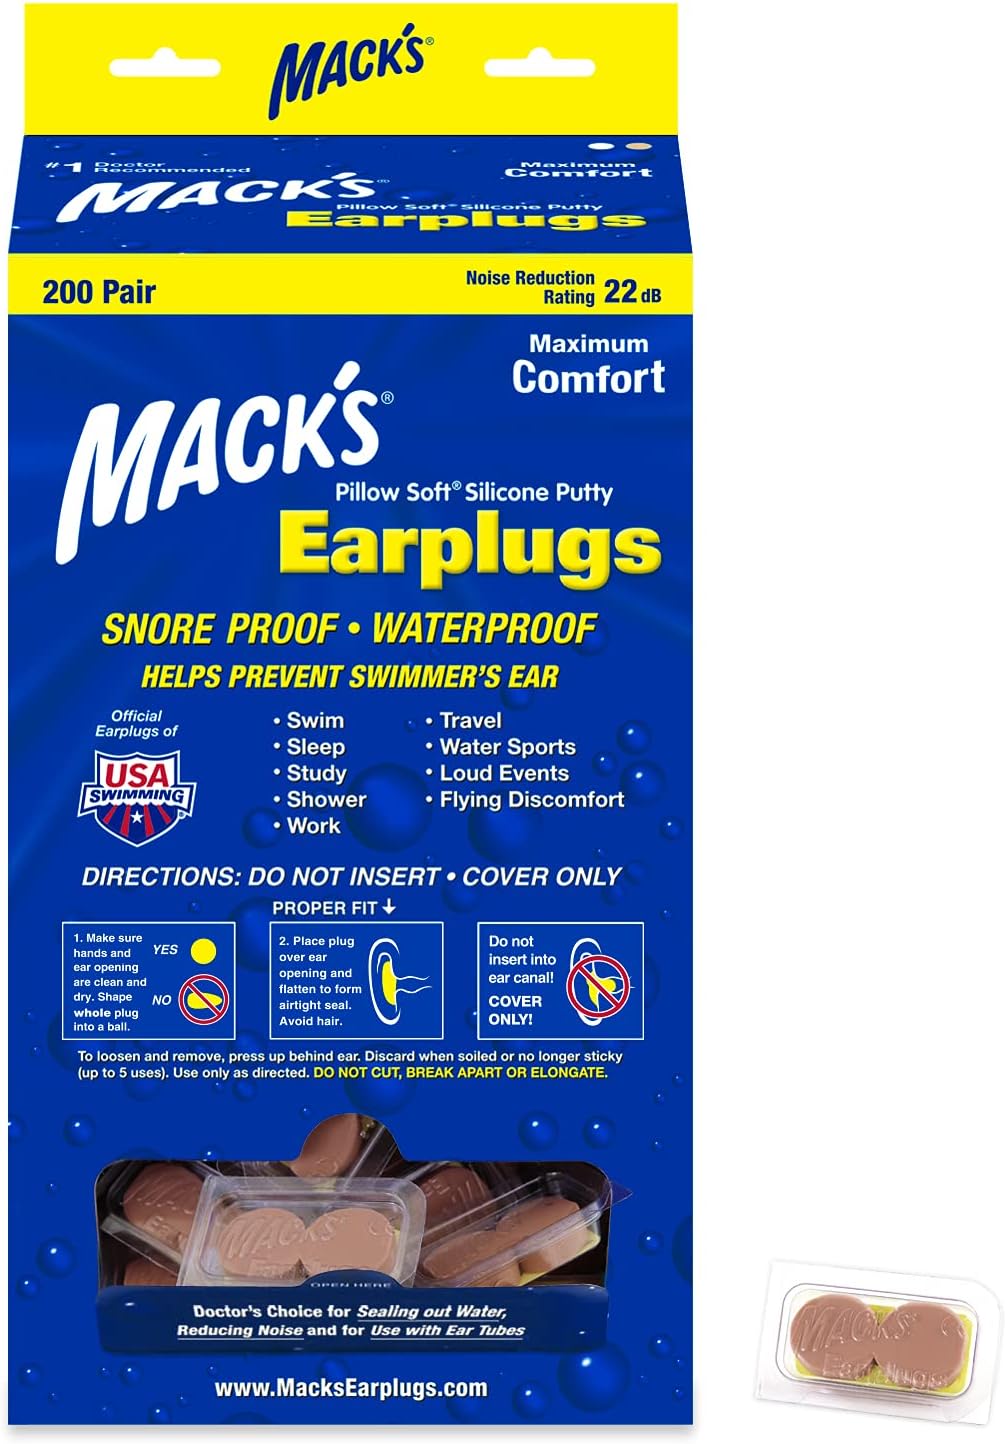 Mack's Pillow Soft Silicone Earplugs - 200 Pair Dispenser - The Original Moldable Silicone Putty Ear Plugs for Sleeping, Snoring, Swimming, Travel, Concerts and Studying (Beige) | Made in USA